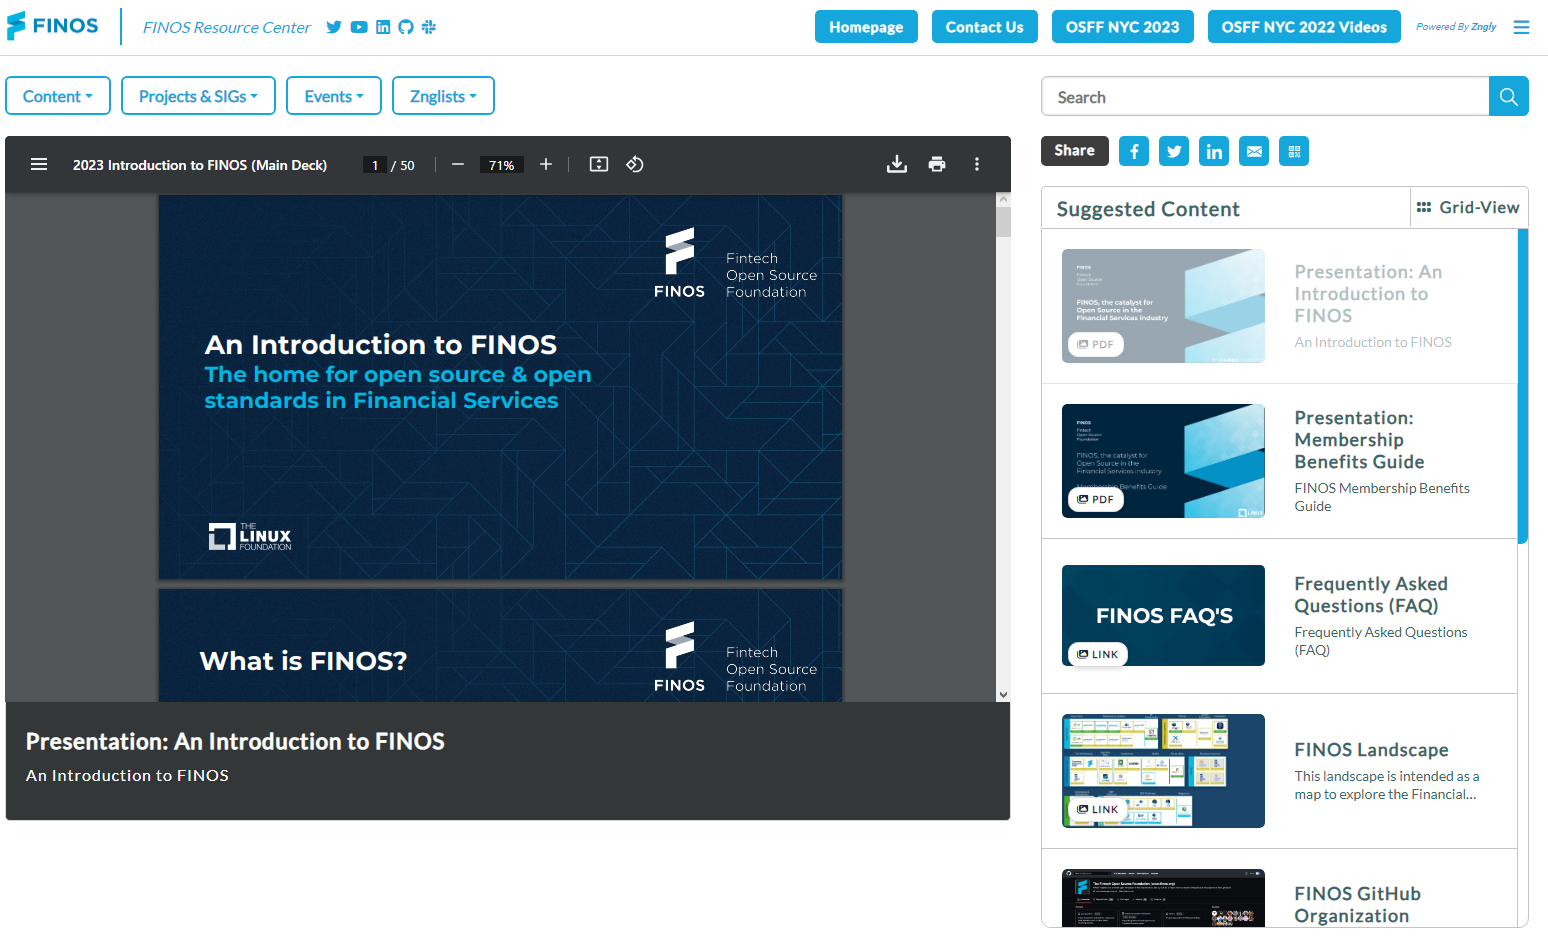 Welcome to the FINOS Resource Centre!